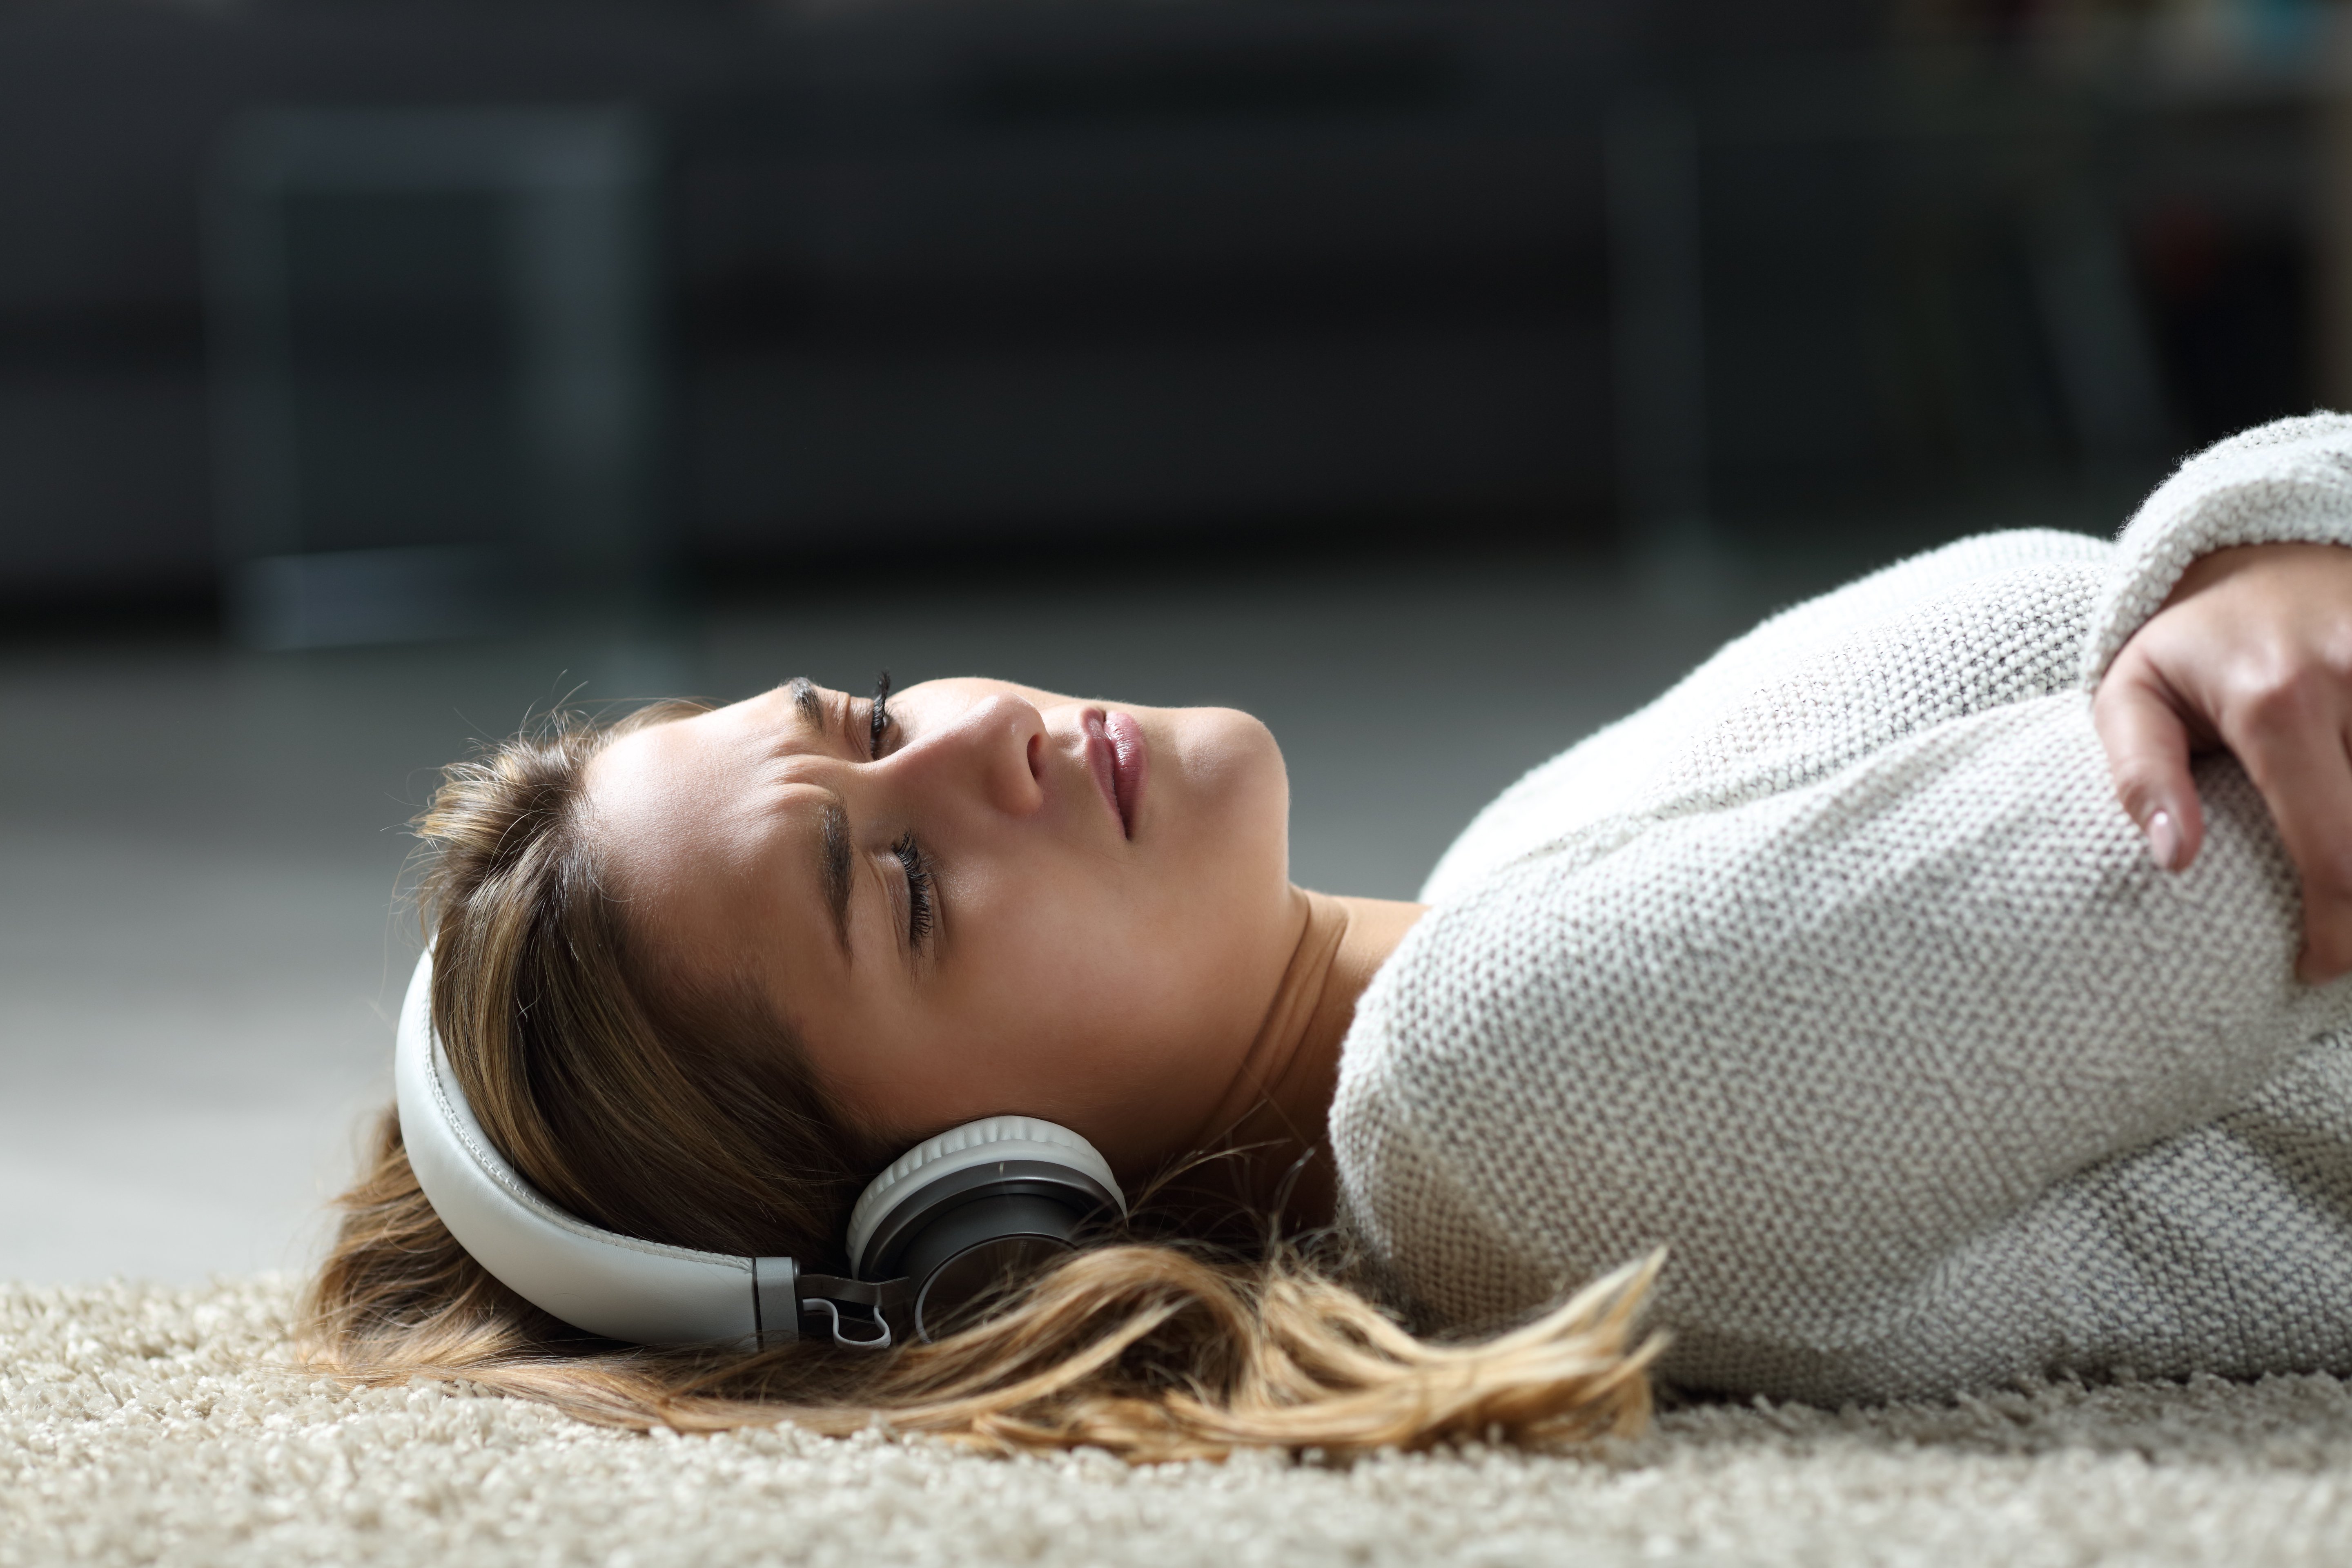 Sad woman listening to music on the floor | Source: Getty Images